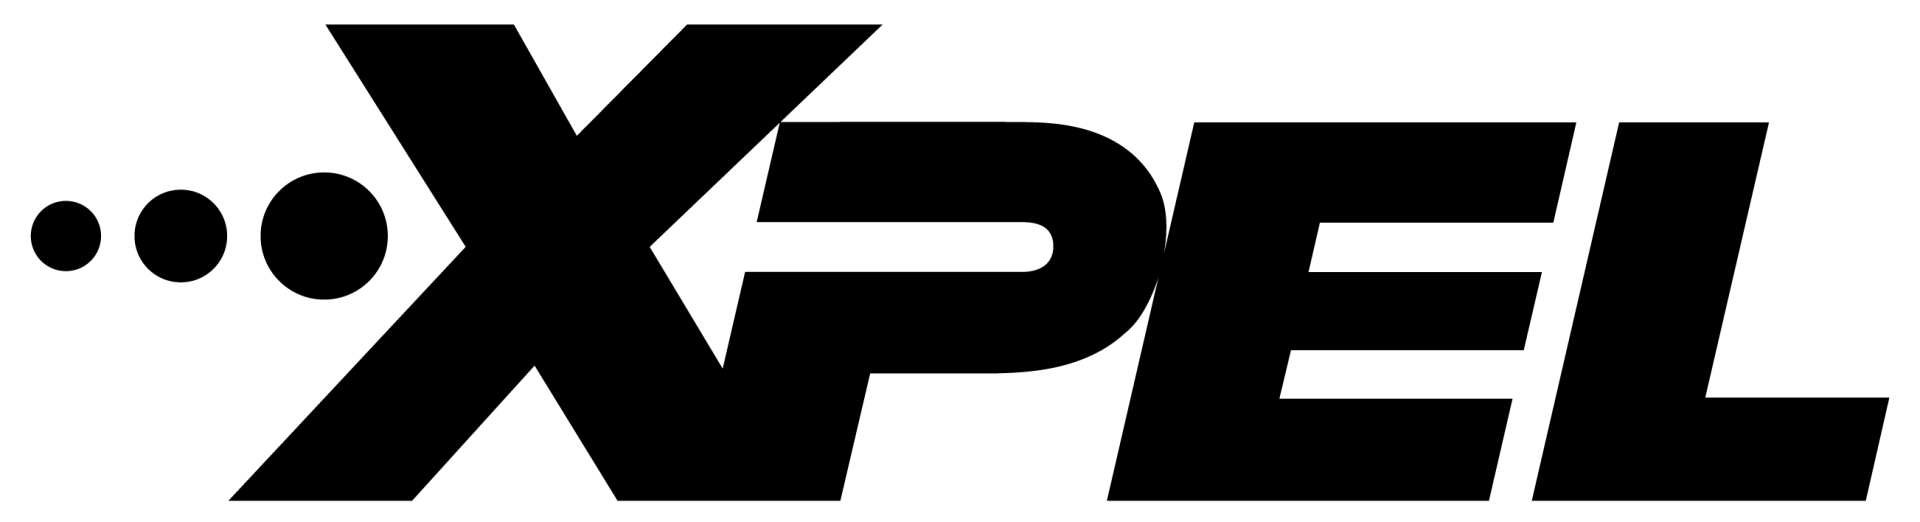 A black and white logo for xpel on a white background.